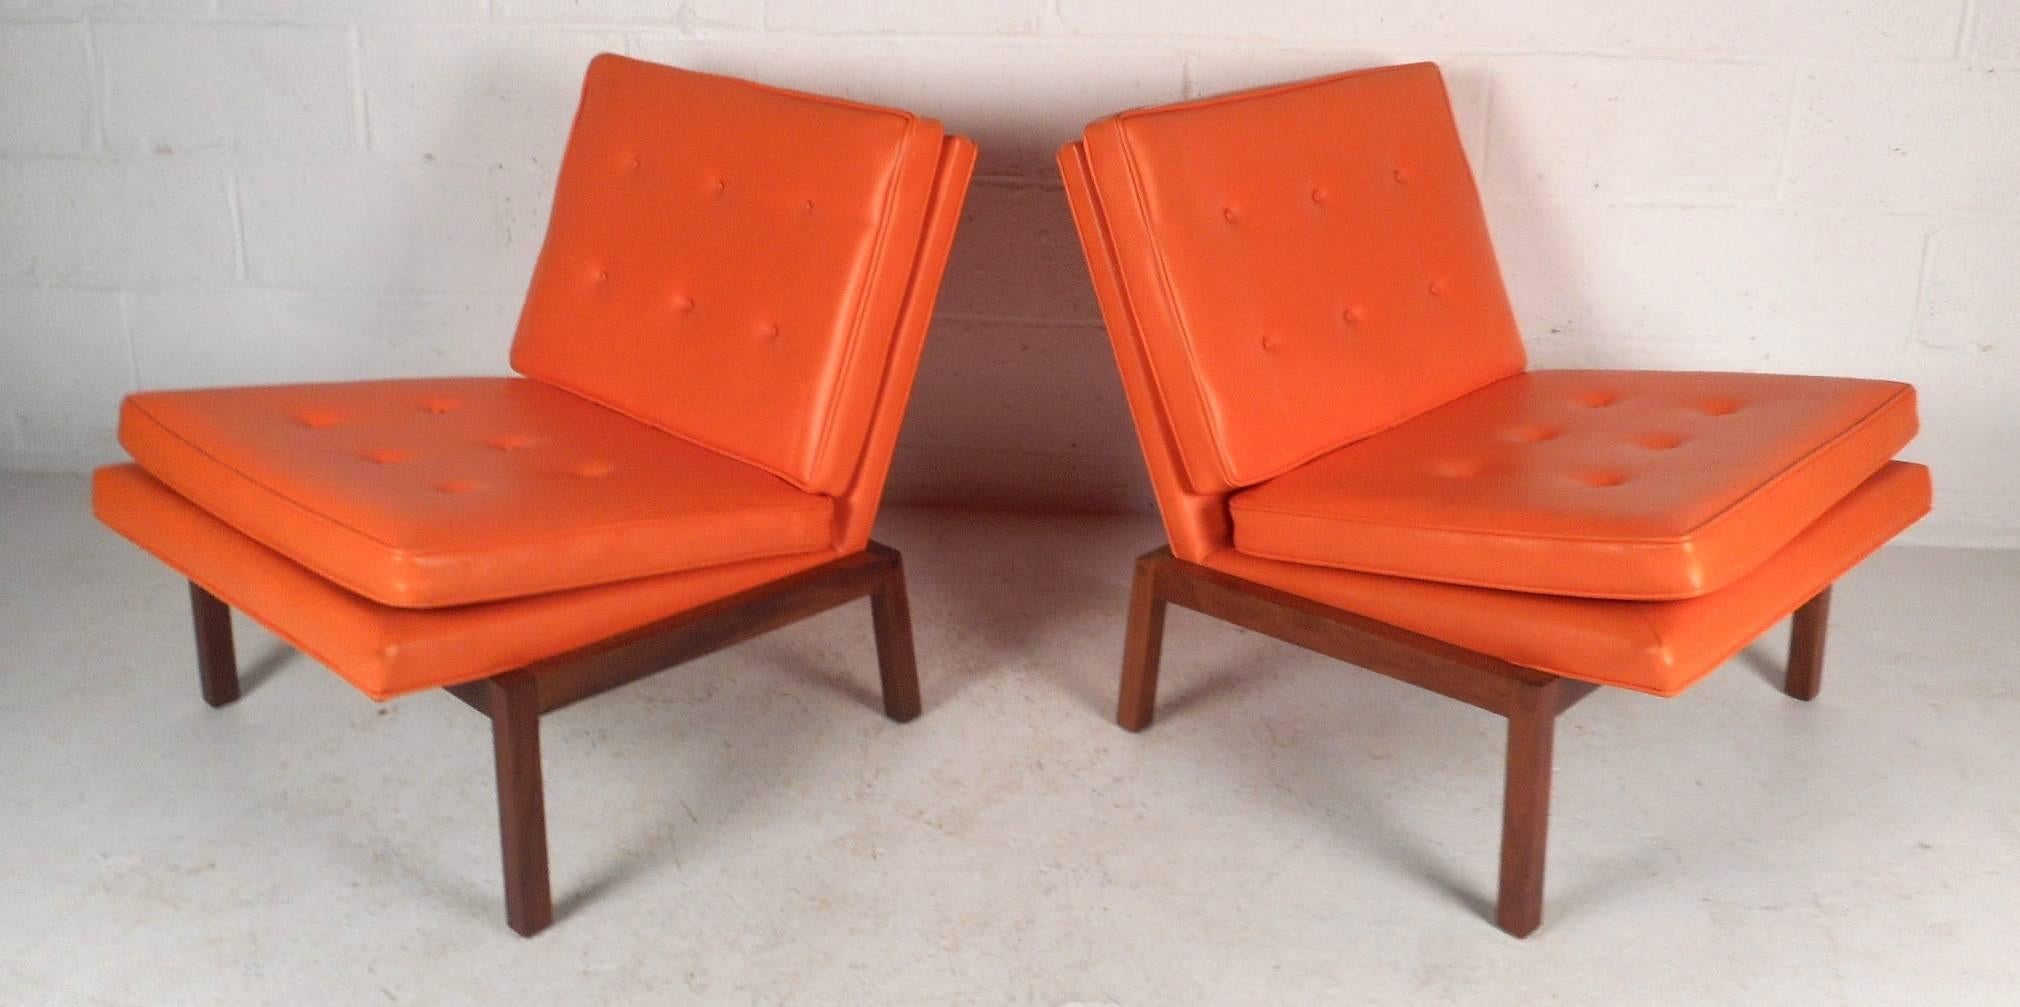 Exquisite pair of vintage modern lounge chairs covered in elegant orange tufted vinyl. This stunning pair features a solid walnut base with angled legs and thick padded cushions. The unique wide design has smaller rear legs so that this piece leans